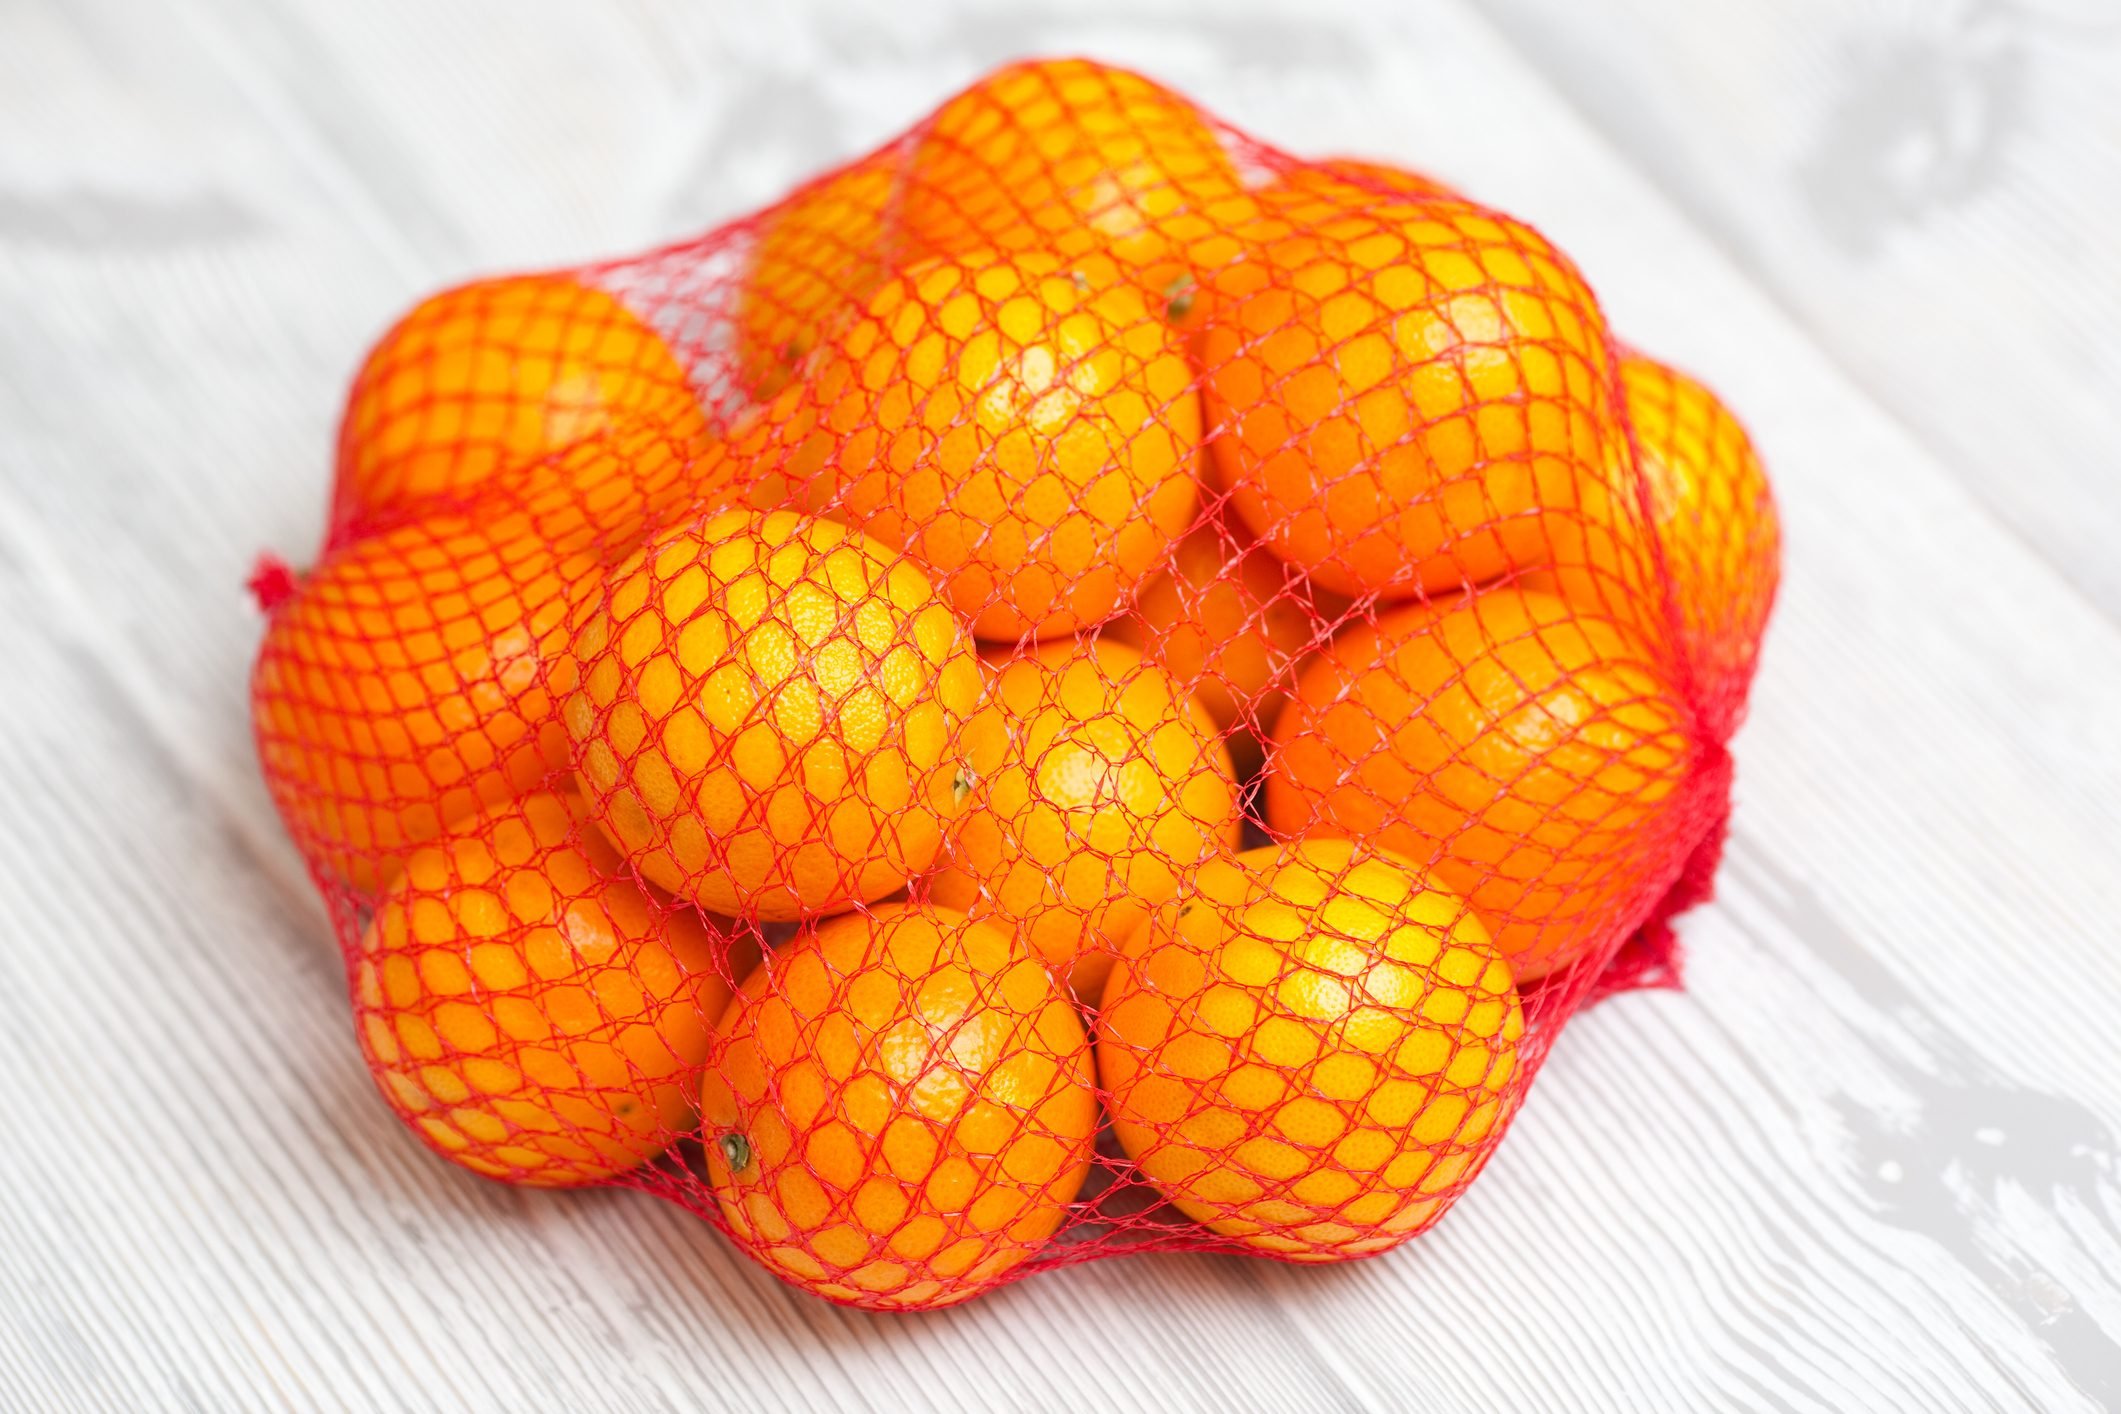 oranges in net bag on white wood background